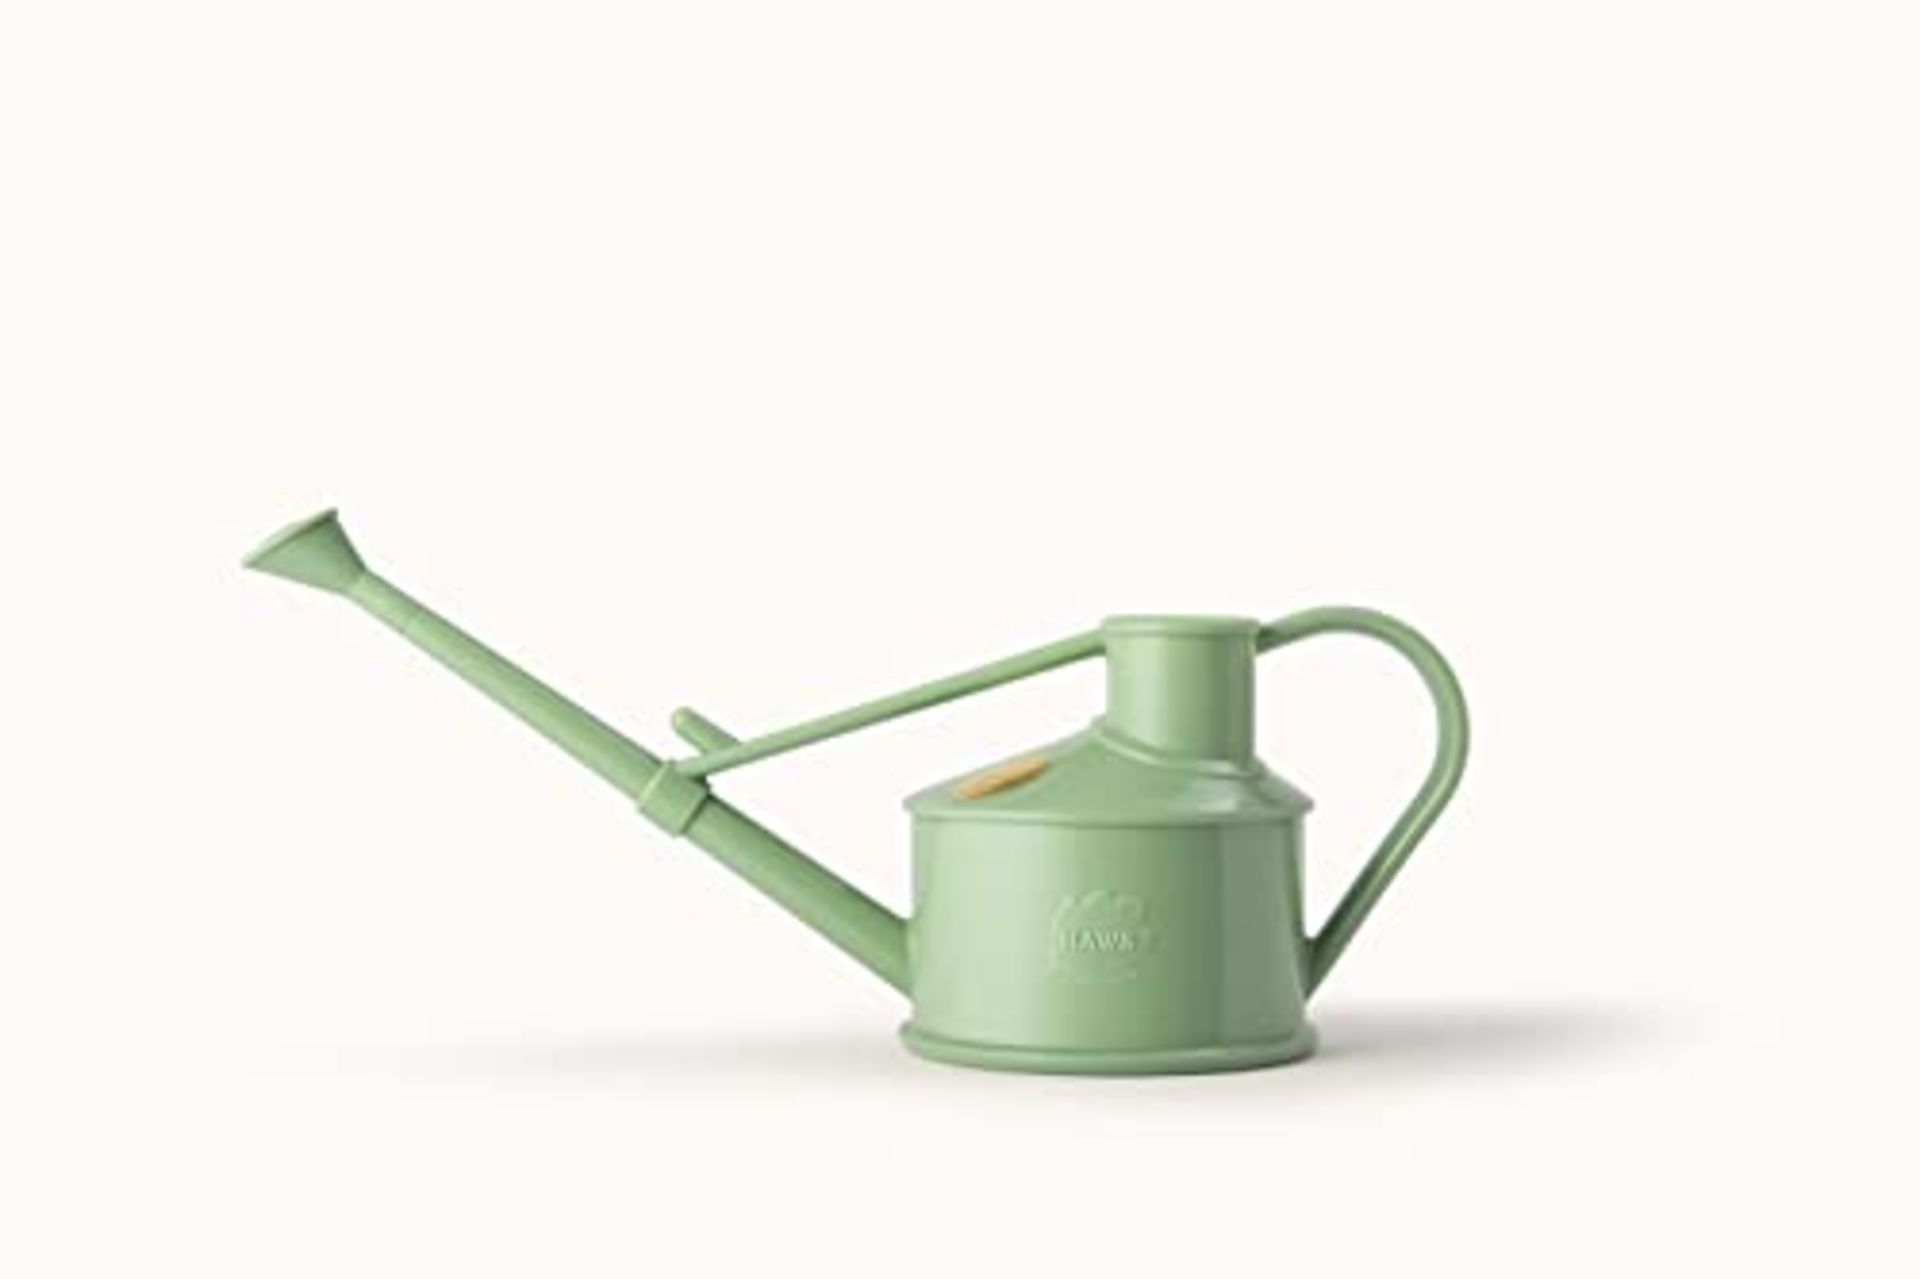 Indoor Plastic Watering Can | The HAWS Langley Sprinkler - One Pint | Pot Waterer | Fi